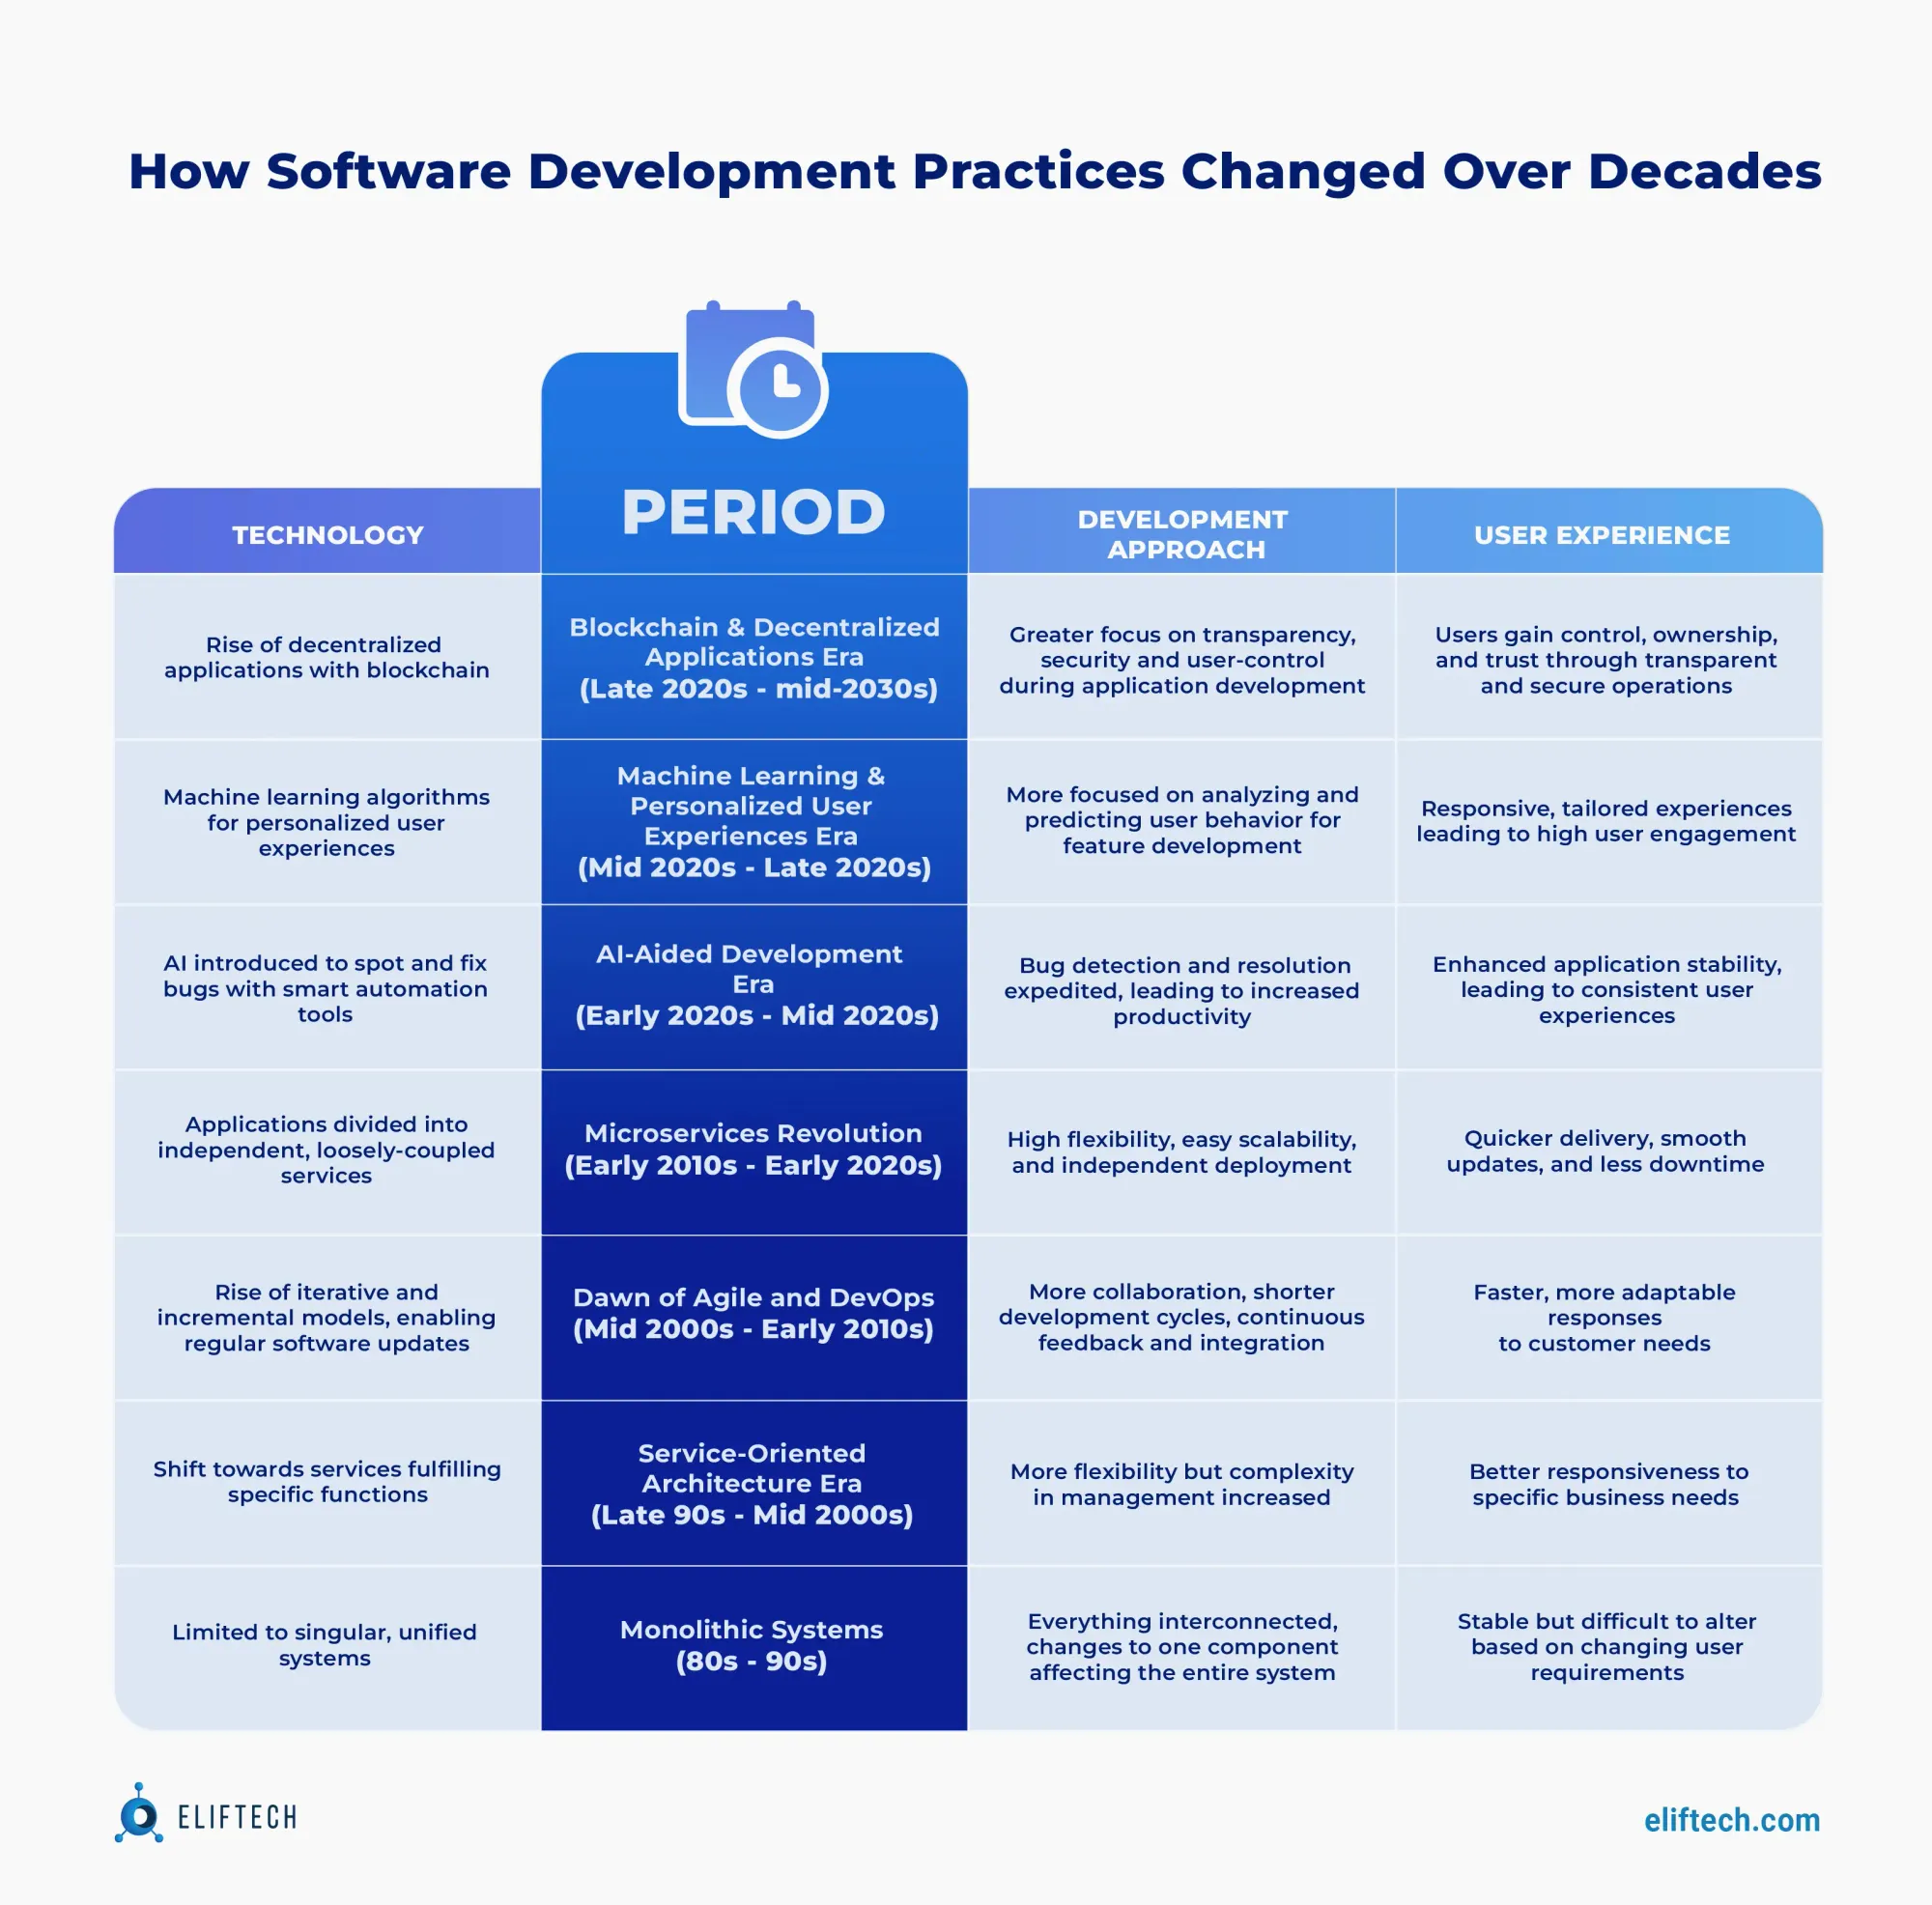 Software development best practices dynamically adapt with tech advancements.